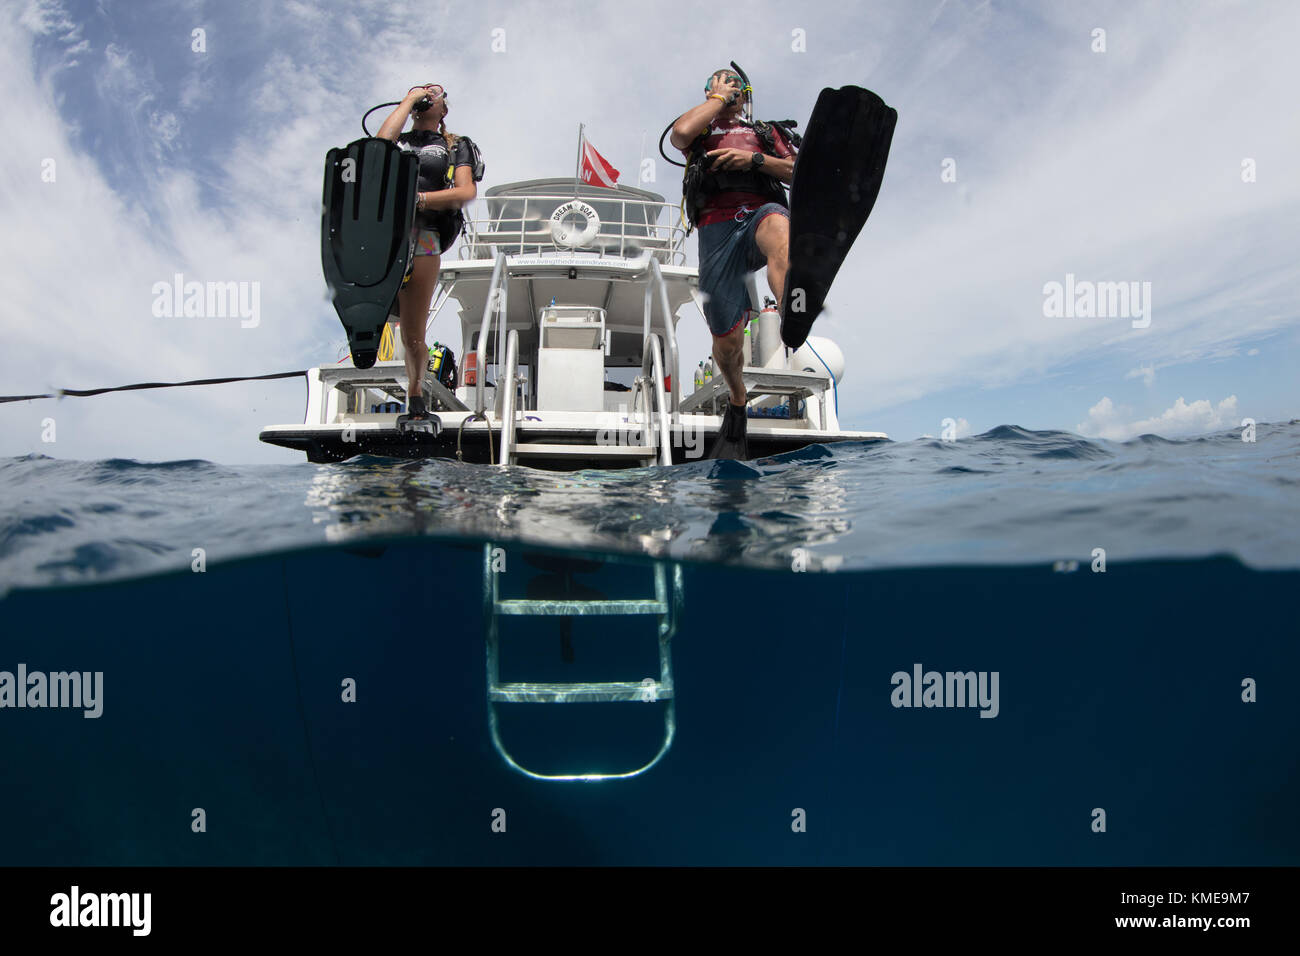 Scuba divers enter water doing giant stride. Stock Photo